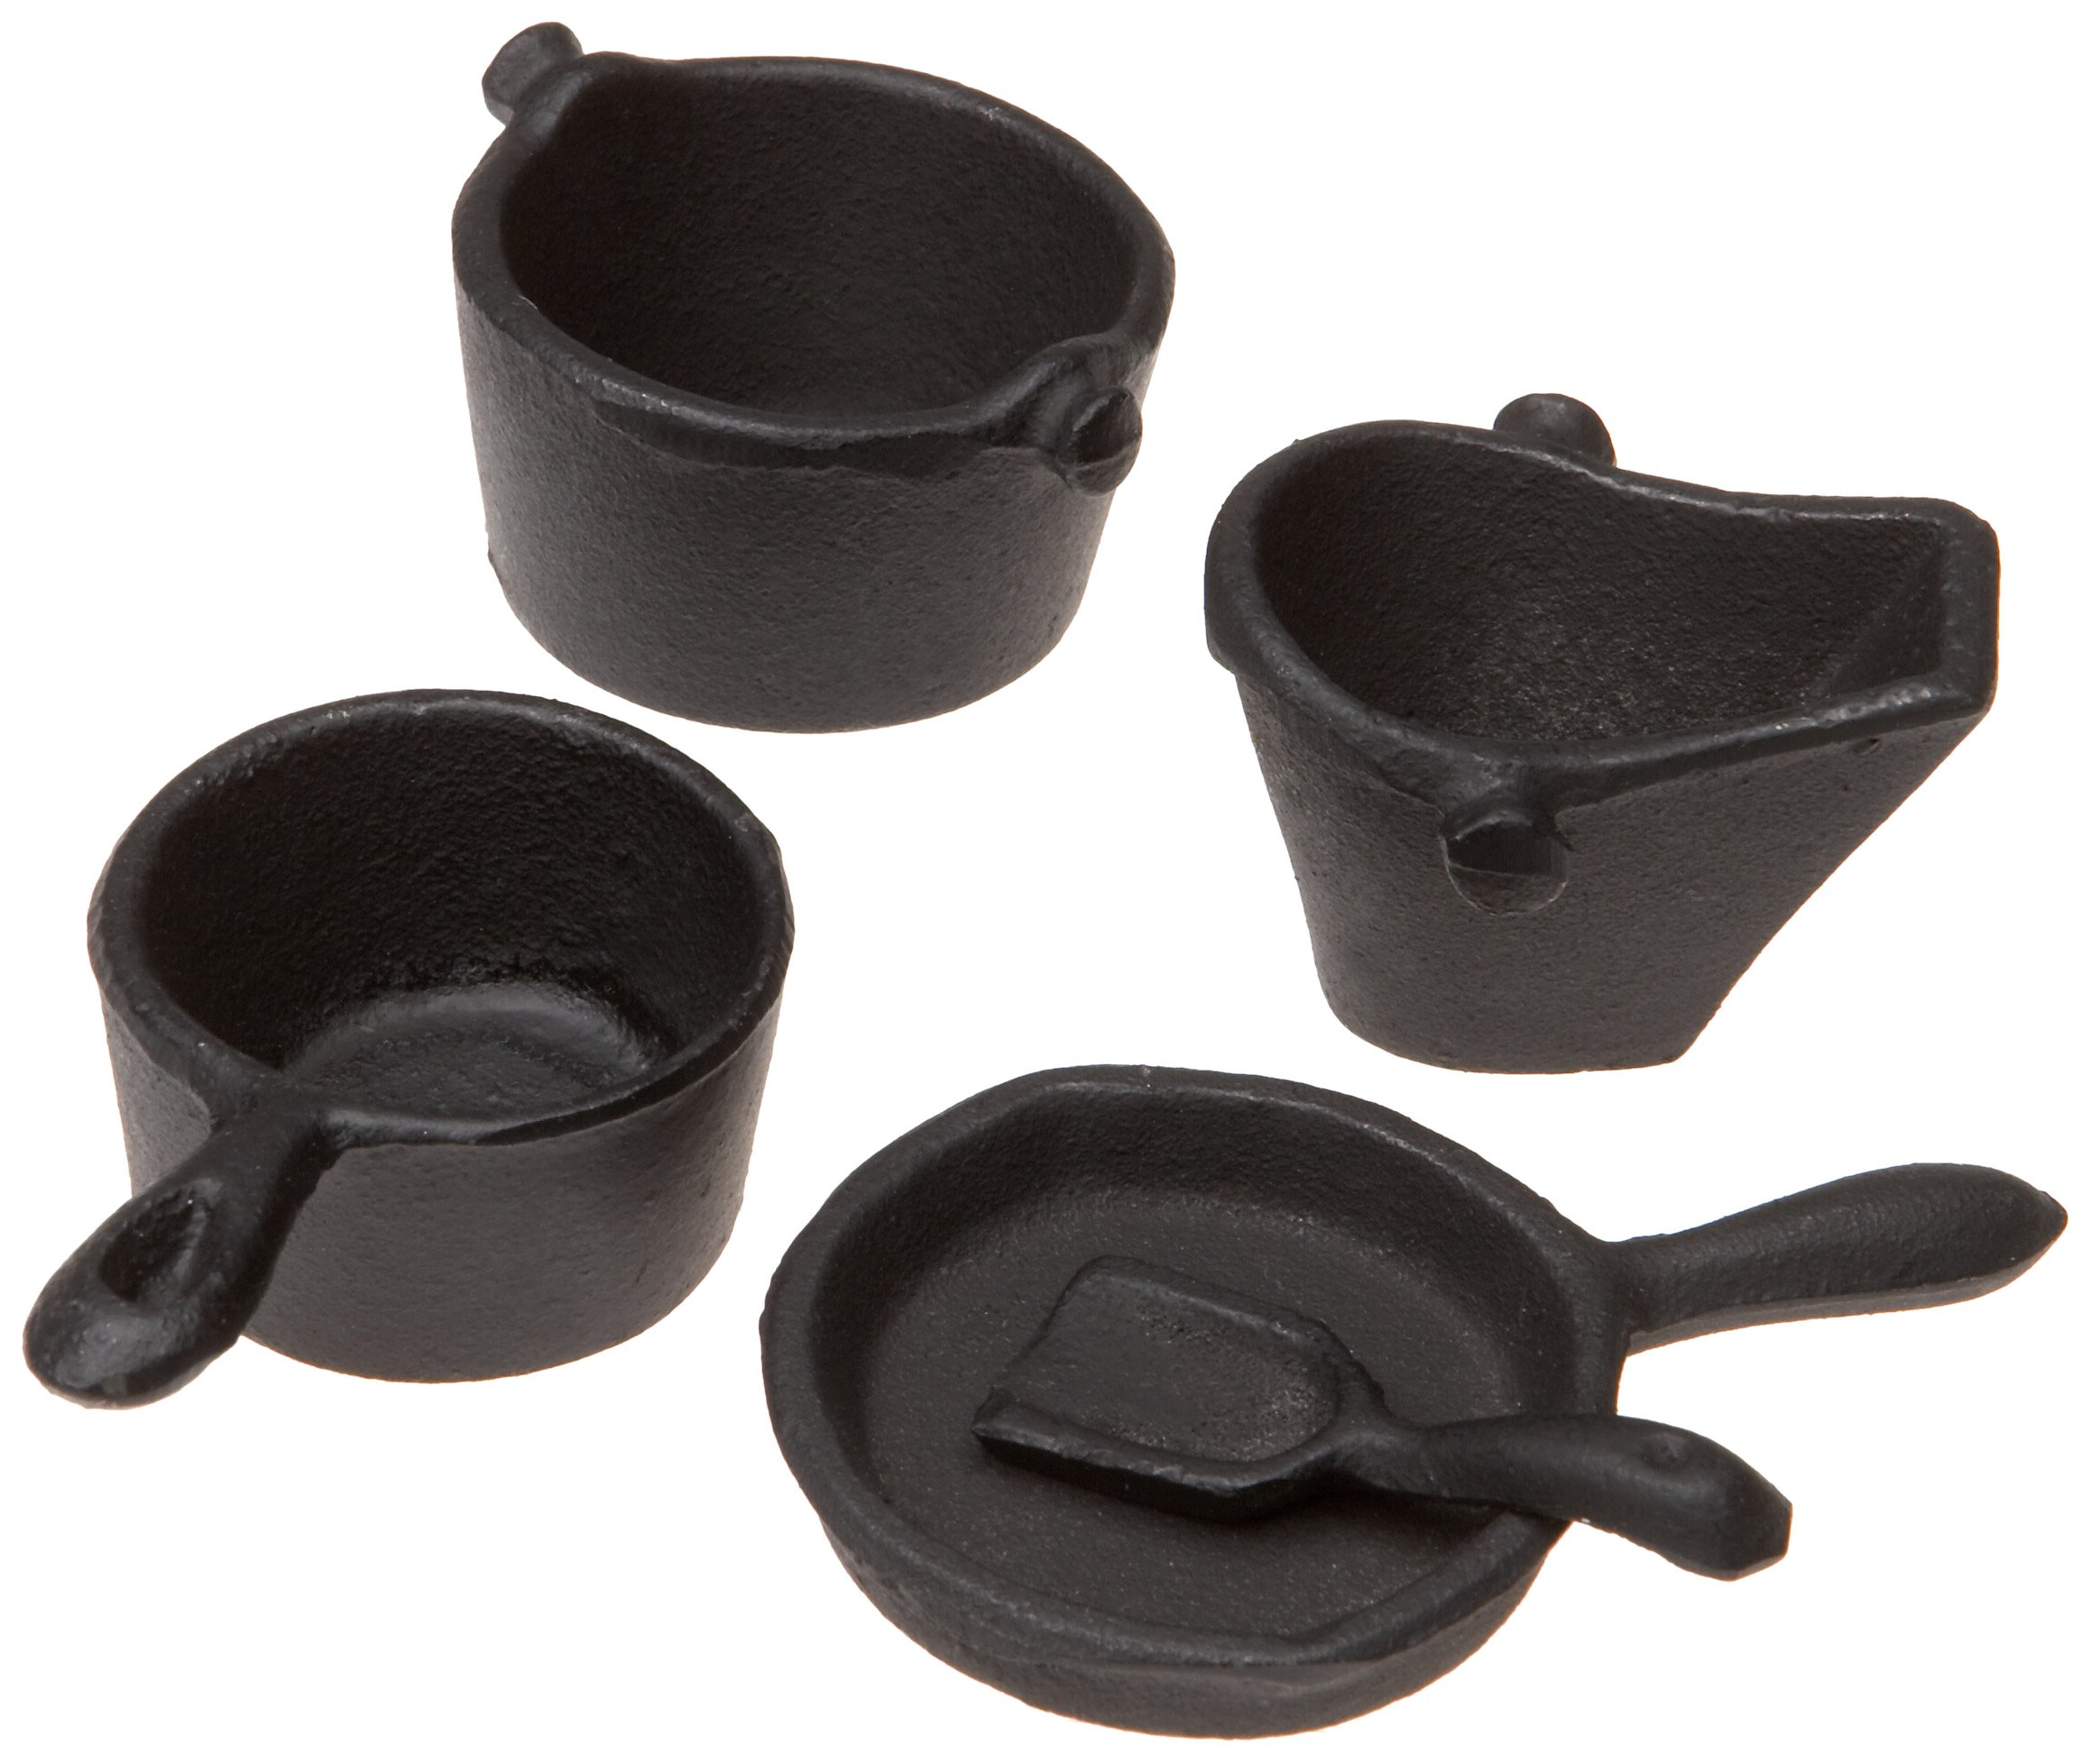 Old Mountain Black Mini Pot Belly Stove Set, with Accessories, 13 Inch Tall